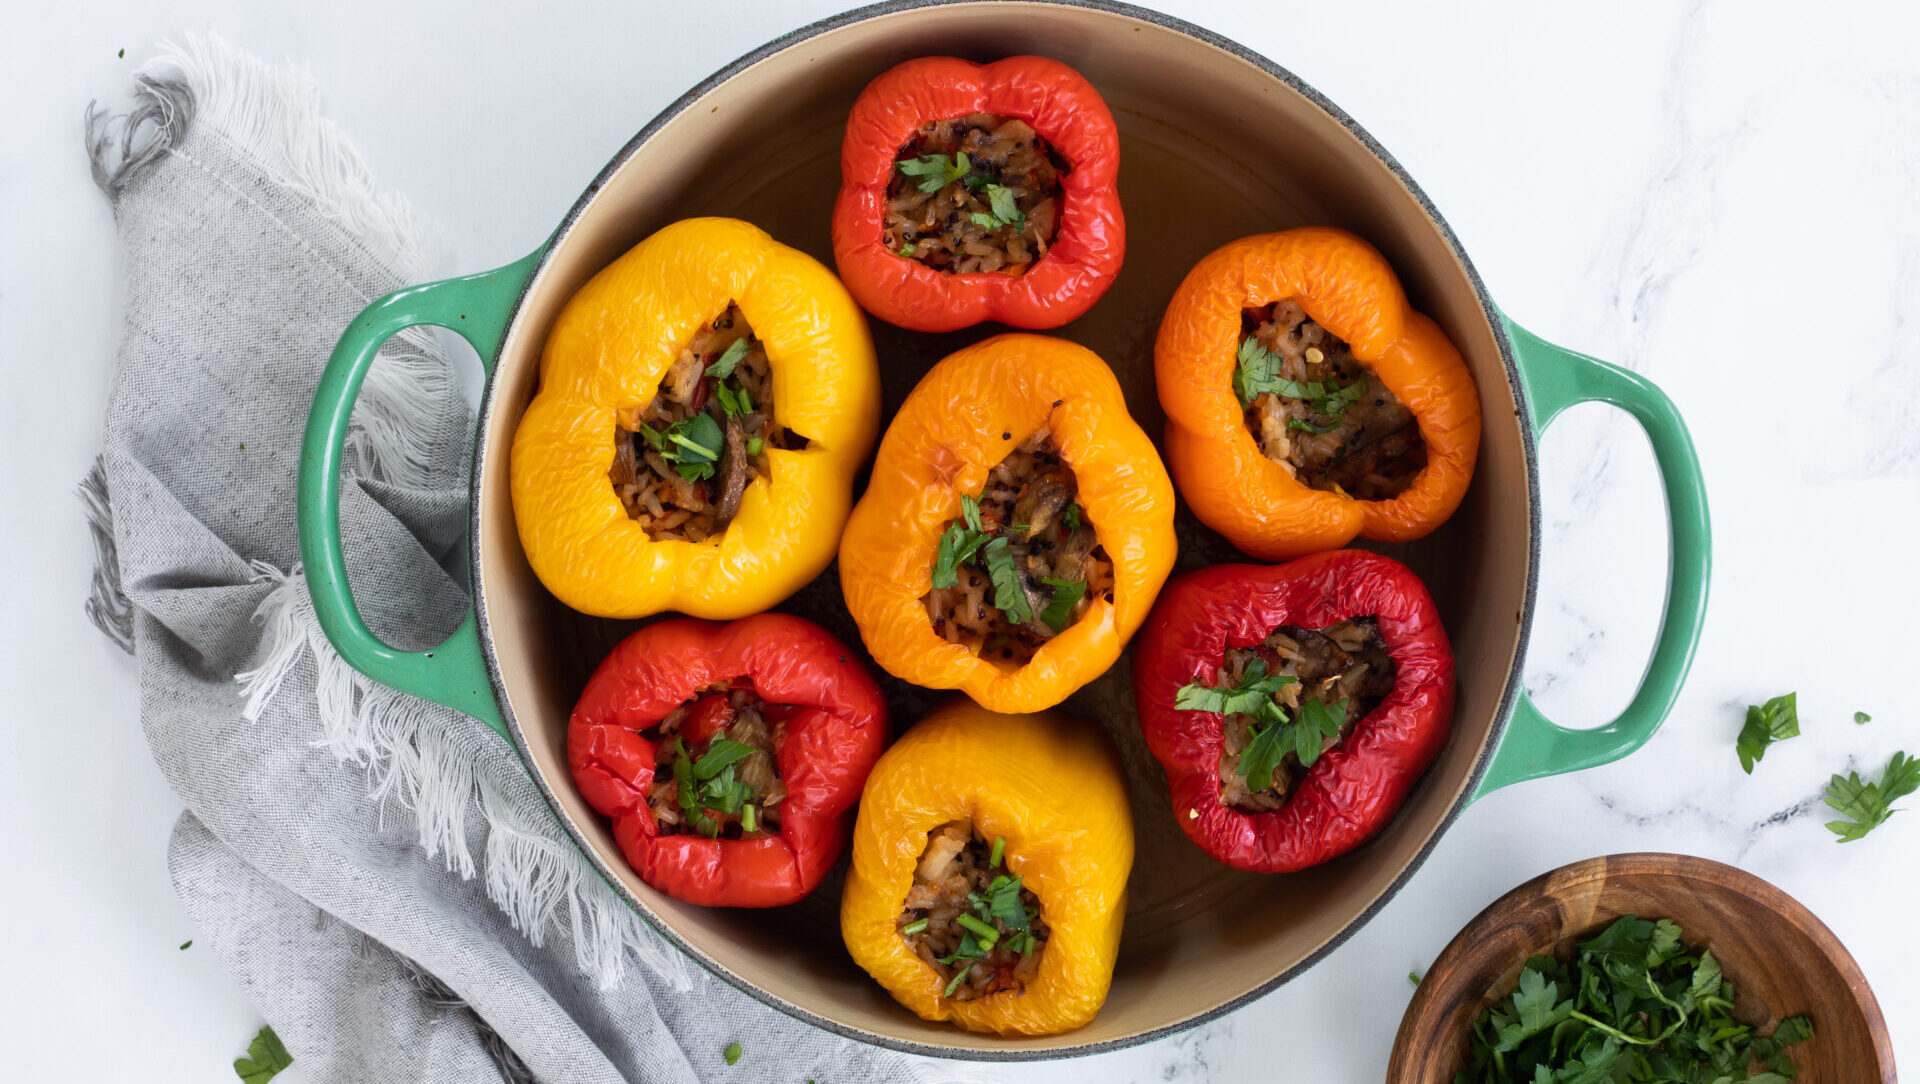 Fridge Clean-out Stuffed Peppers